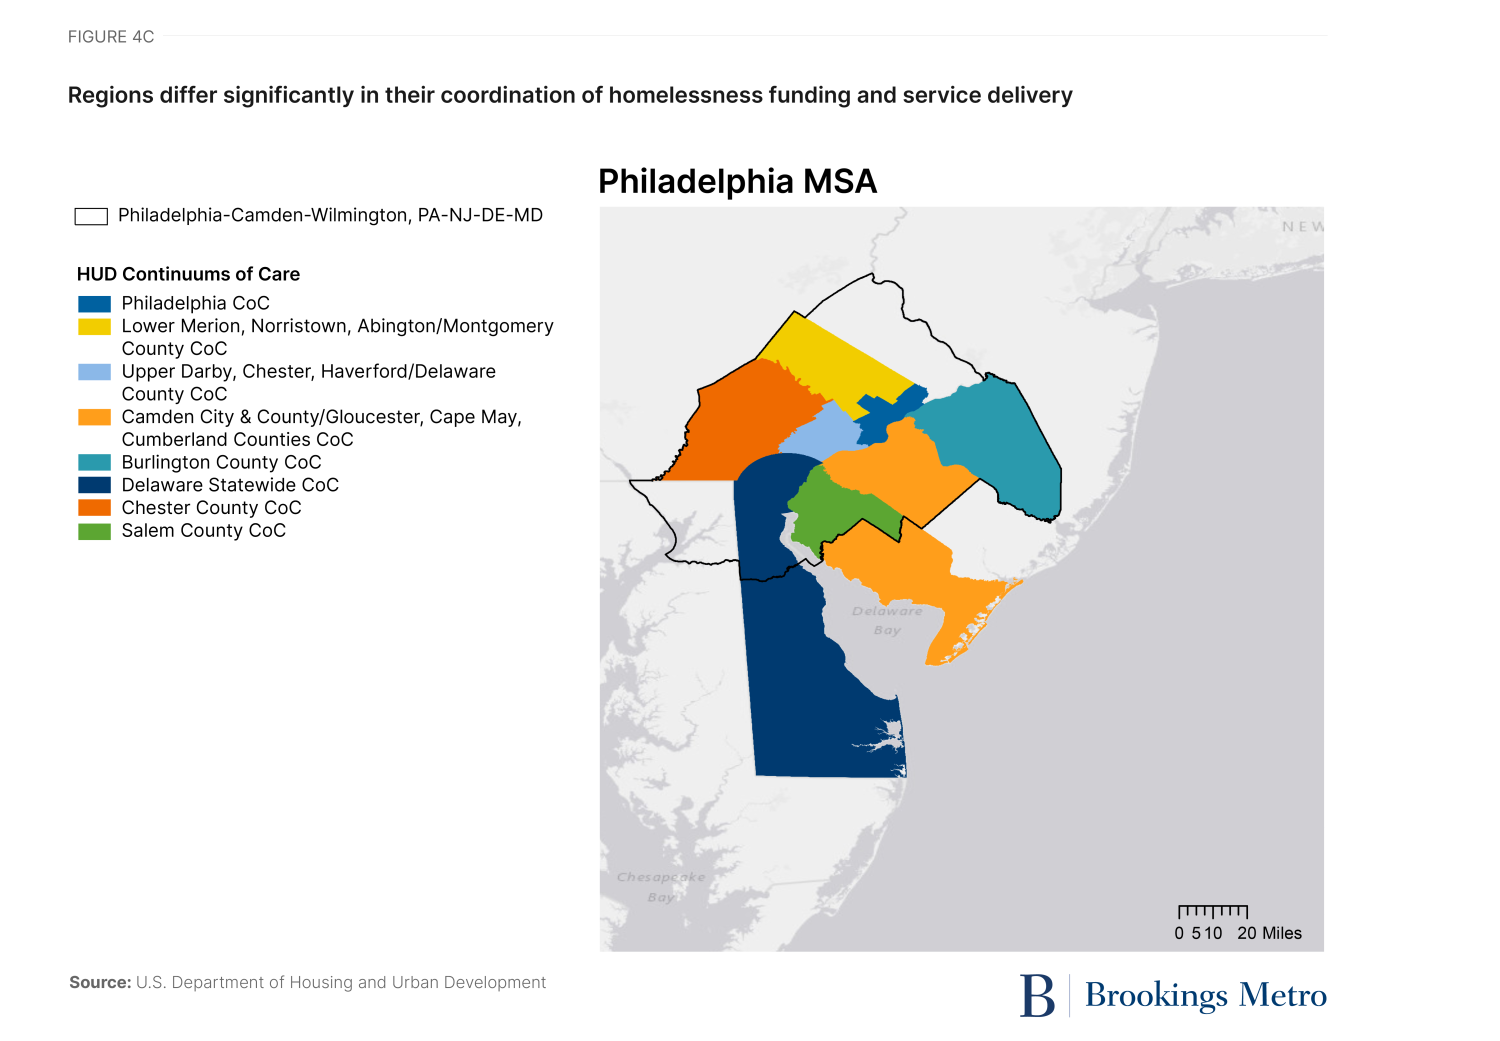 Figure 4. Regions differ significantly in their coordination of homelessness funding and service delivery - Philadelphia